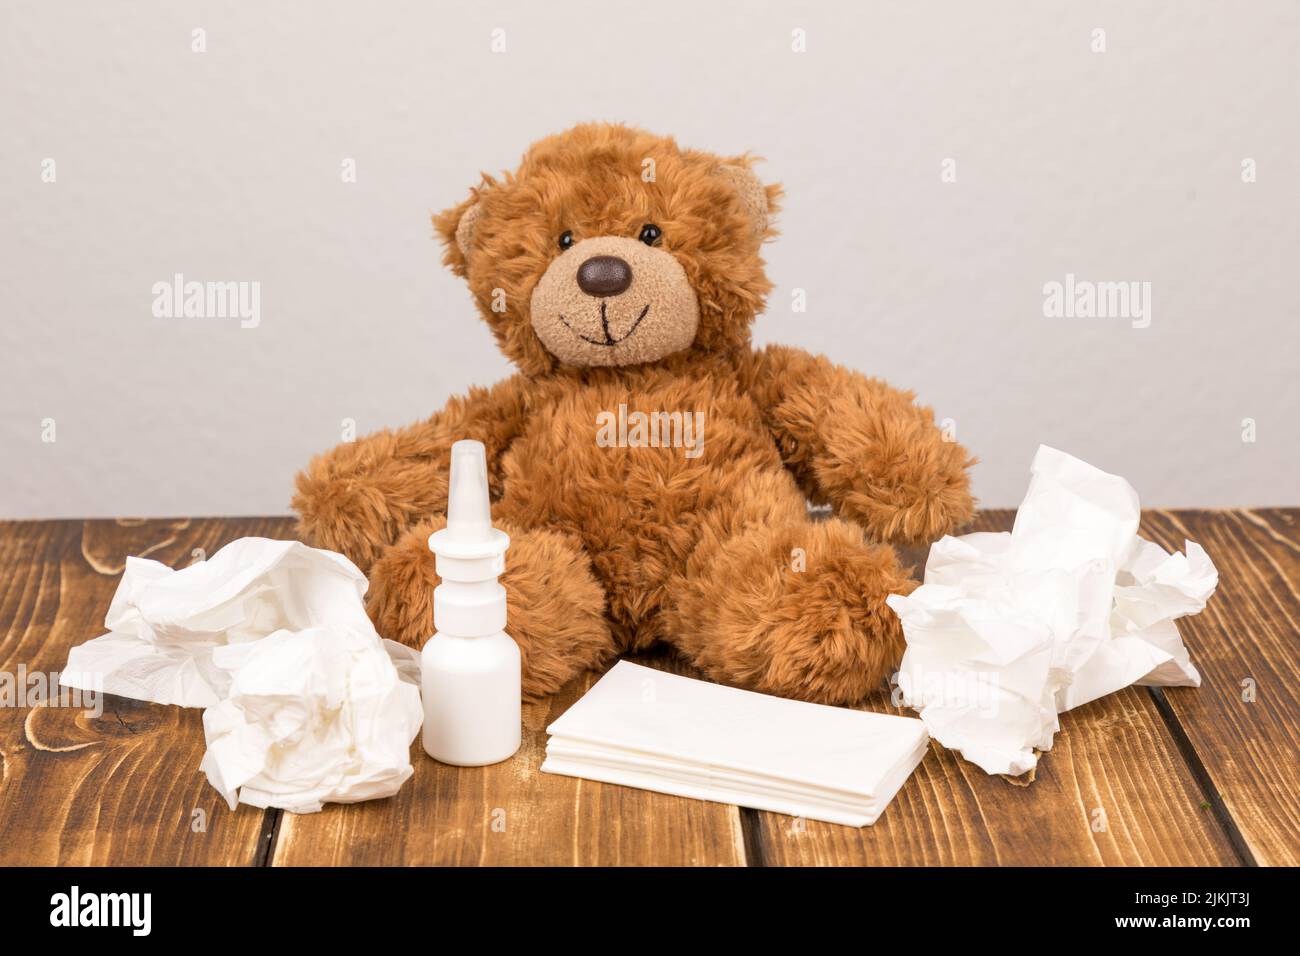 A fluffy teddy bear with a nasal spray and tissues on a wooden surface - suffering from illness Stock Photo